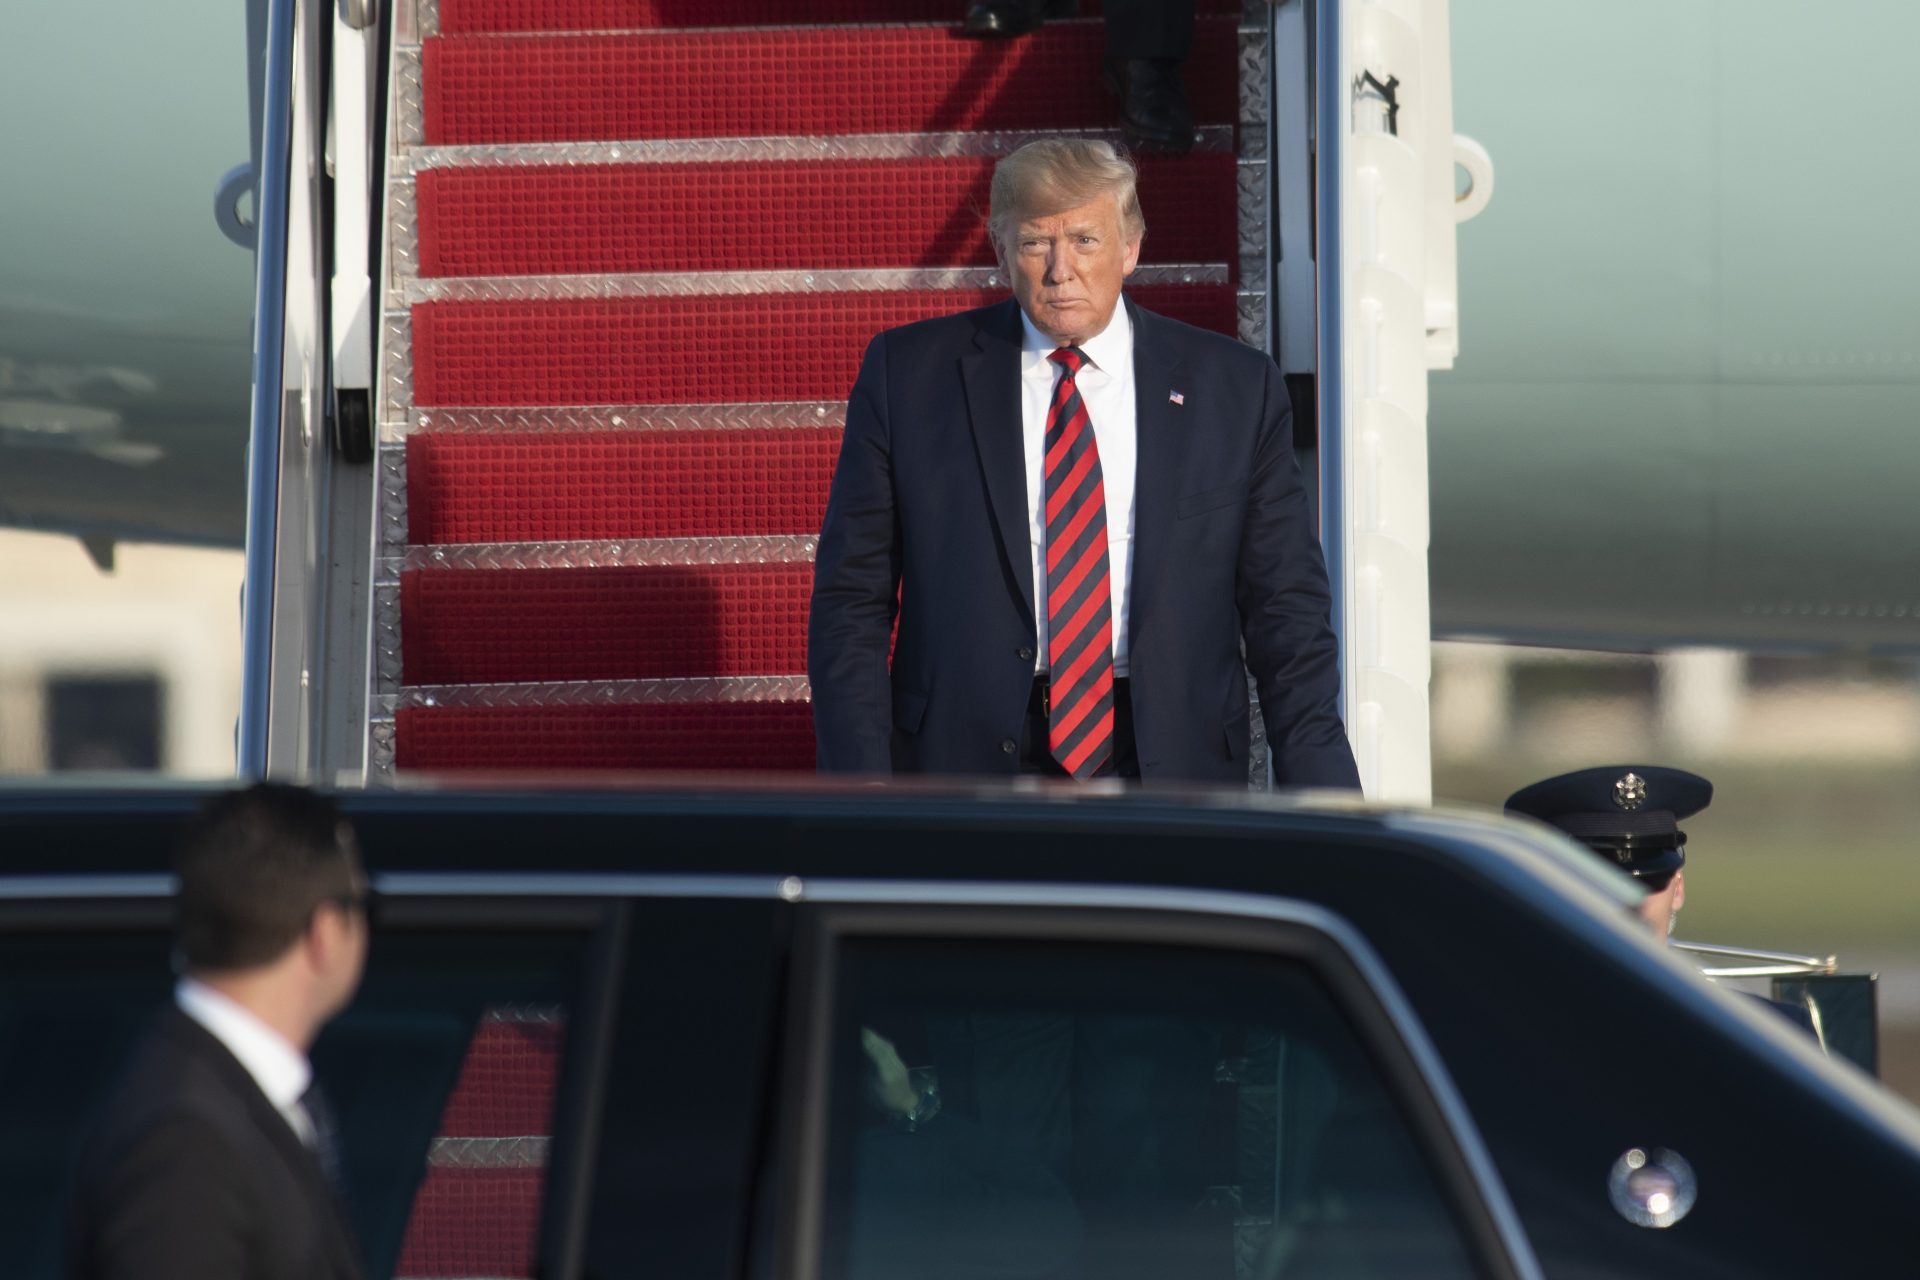 President Donald Trump walks from Air Force One at Andrews Air Force Base, Md., as he arrives following a trip to Chicago to attend the International Association of Chiefs of Police Annual Conference and Exposition, Monday, Oct. 28, 2019.